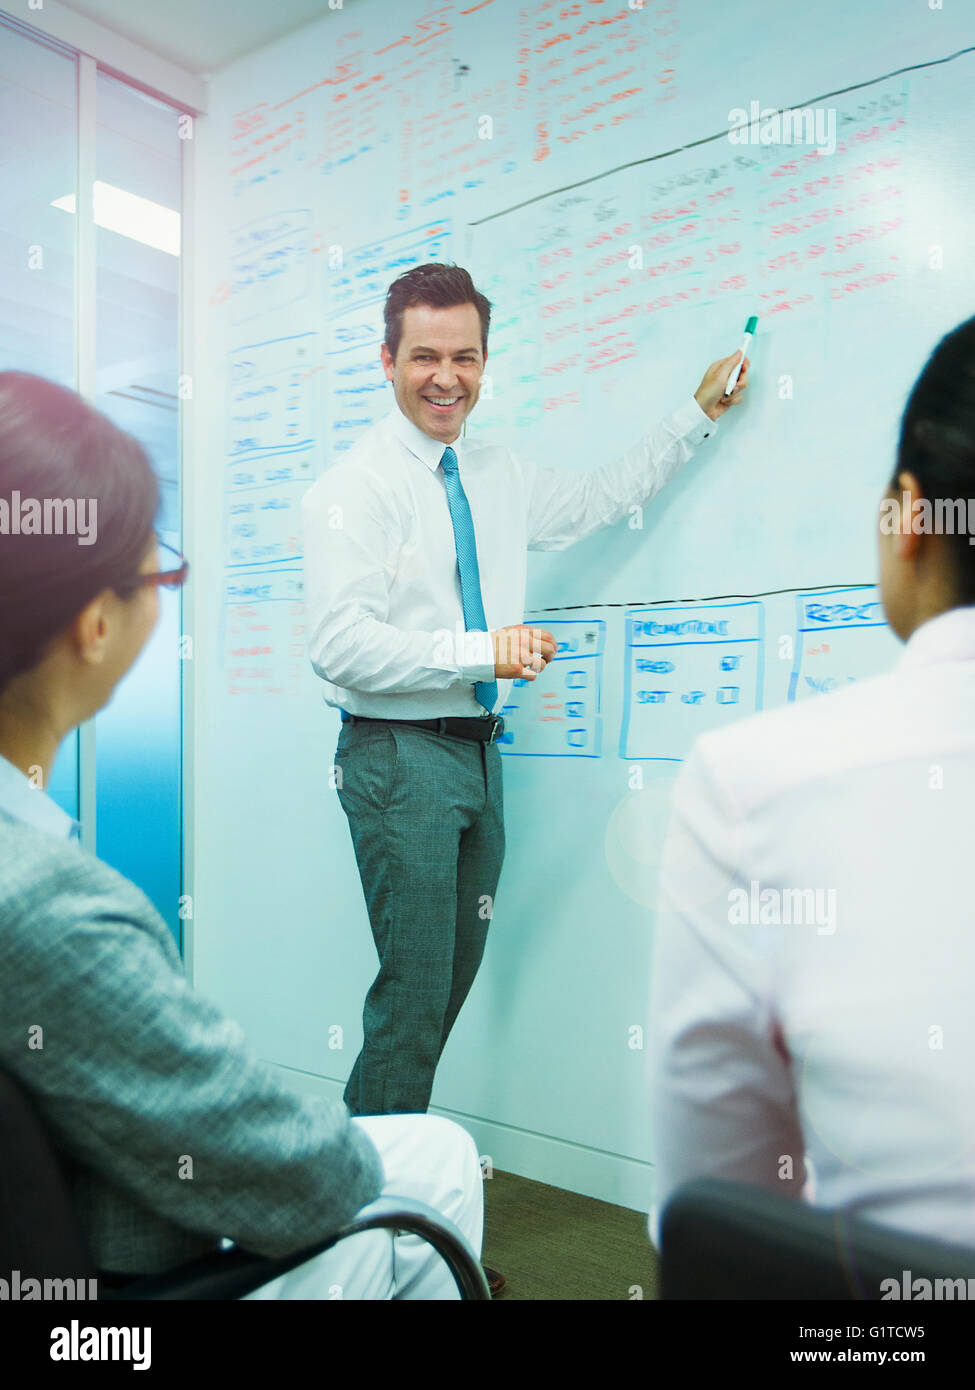 Businessman leading meeting at whiteboard in conference room Stock Photo